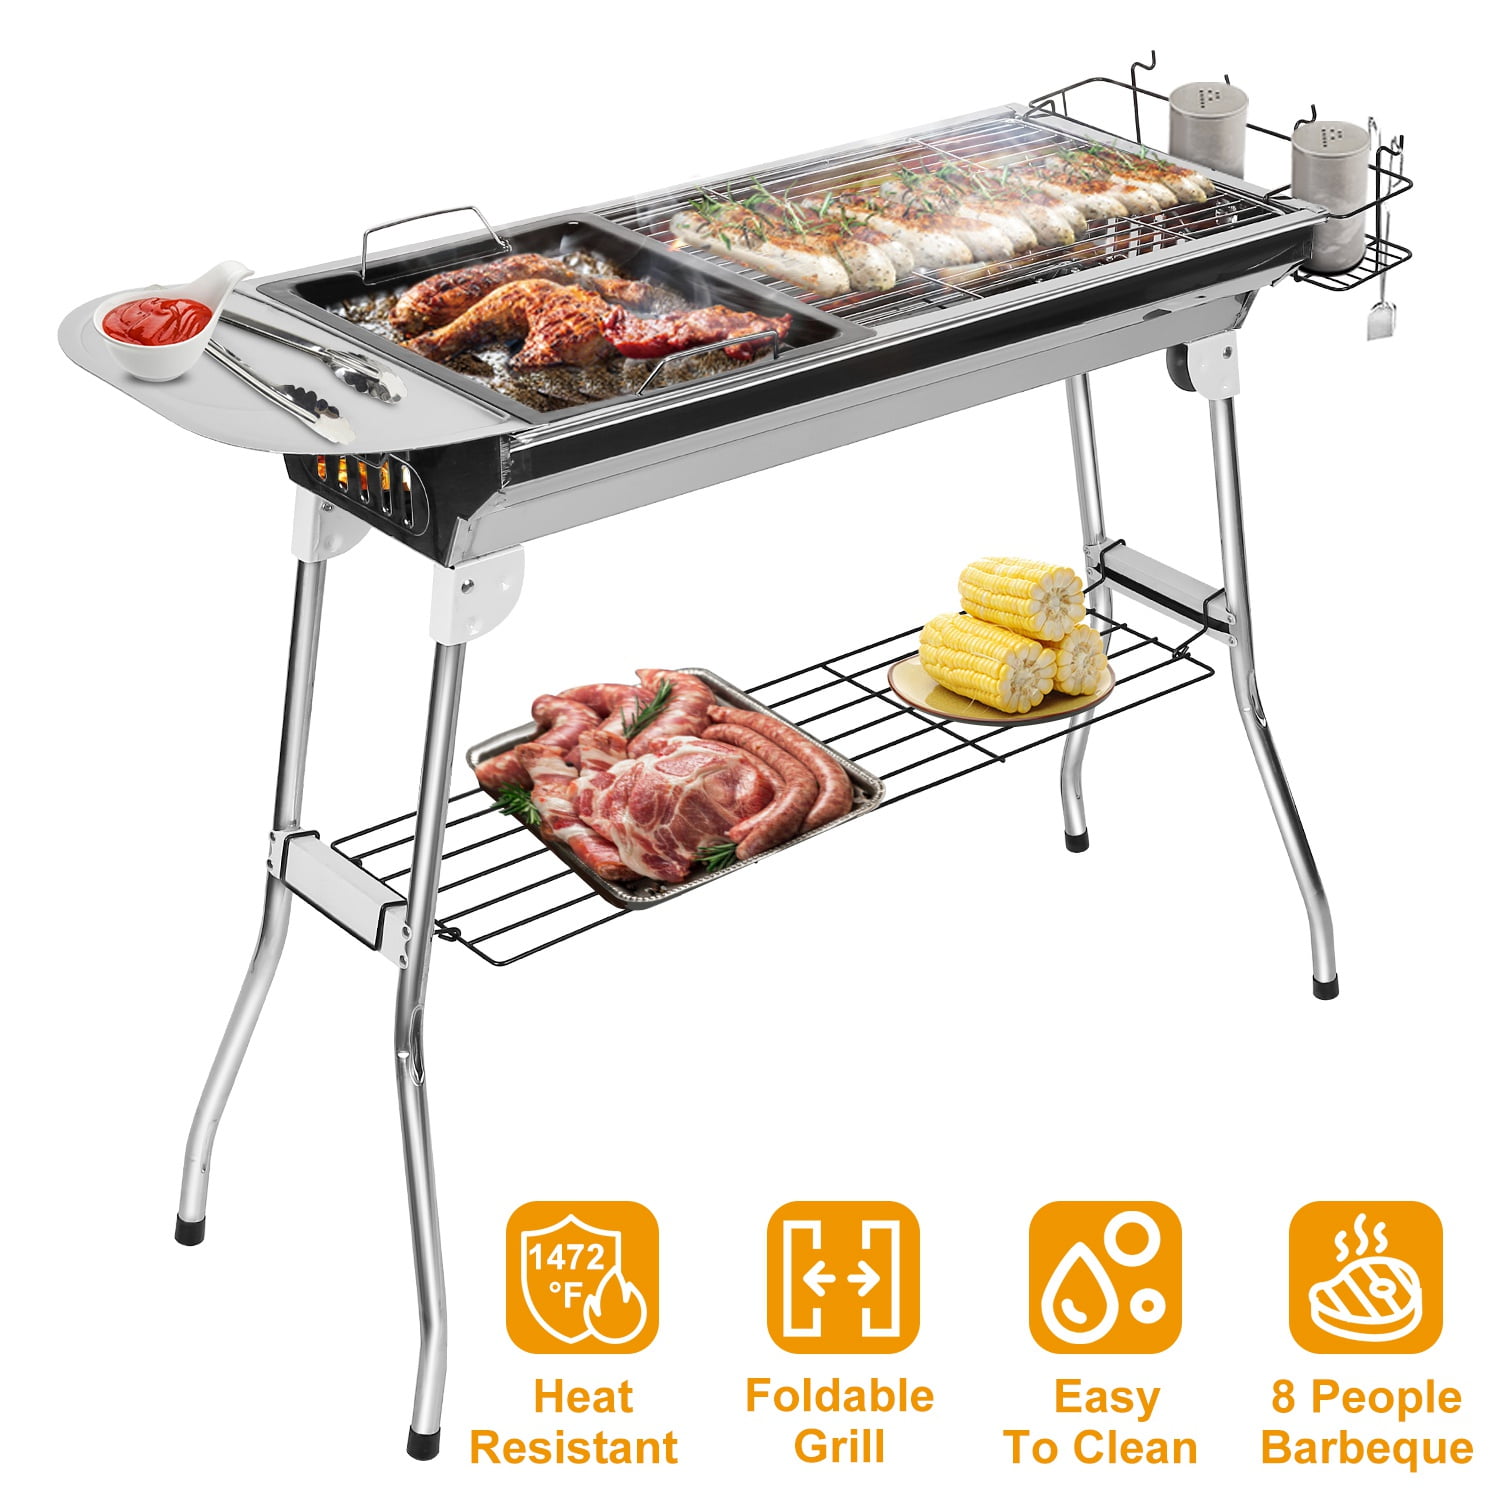 Large BBQ Grill Portable Folding Charcoal Barbecue Garden Picnic BBQ Steel Stove 